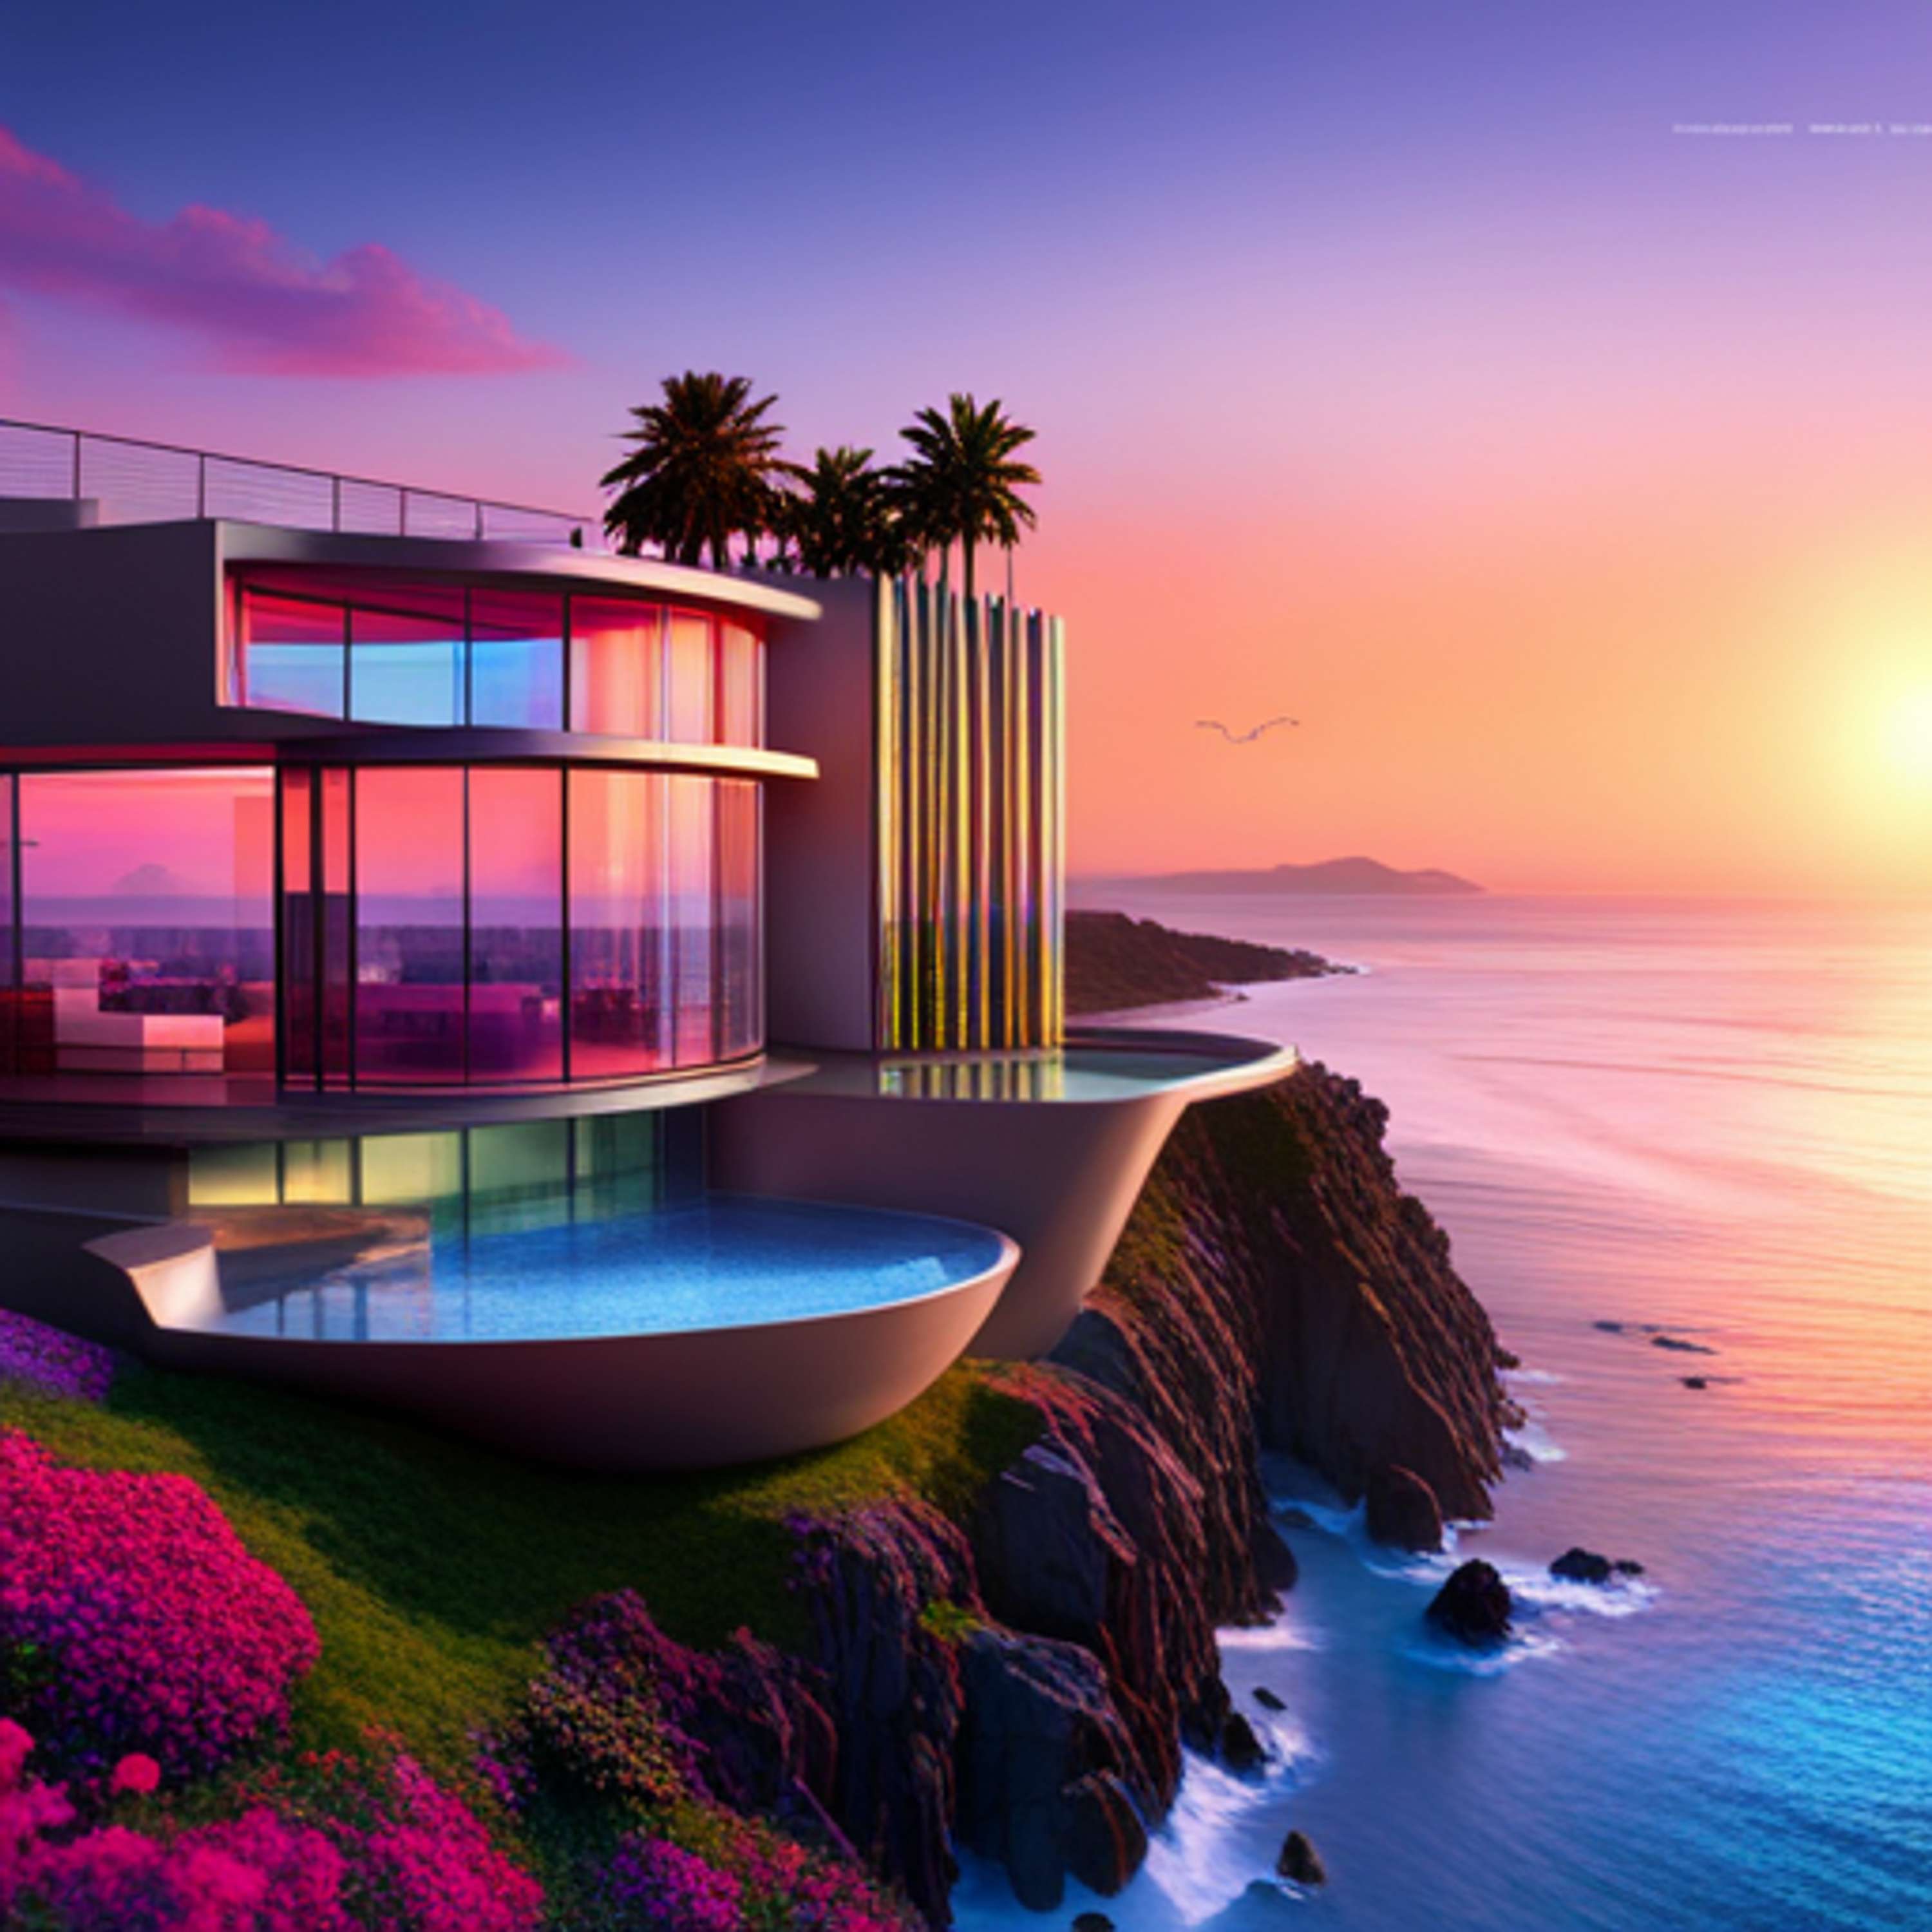 Luxurious Malibu Homes for Sale: Unmatched Ocean Views Await